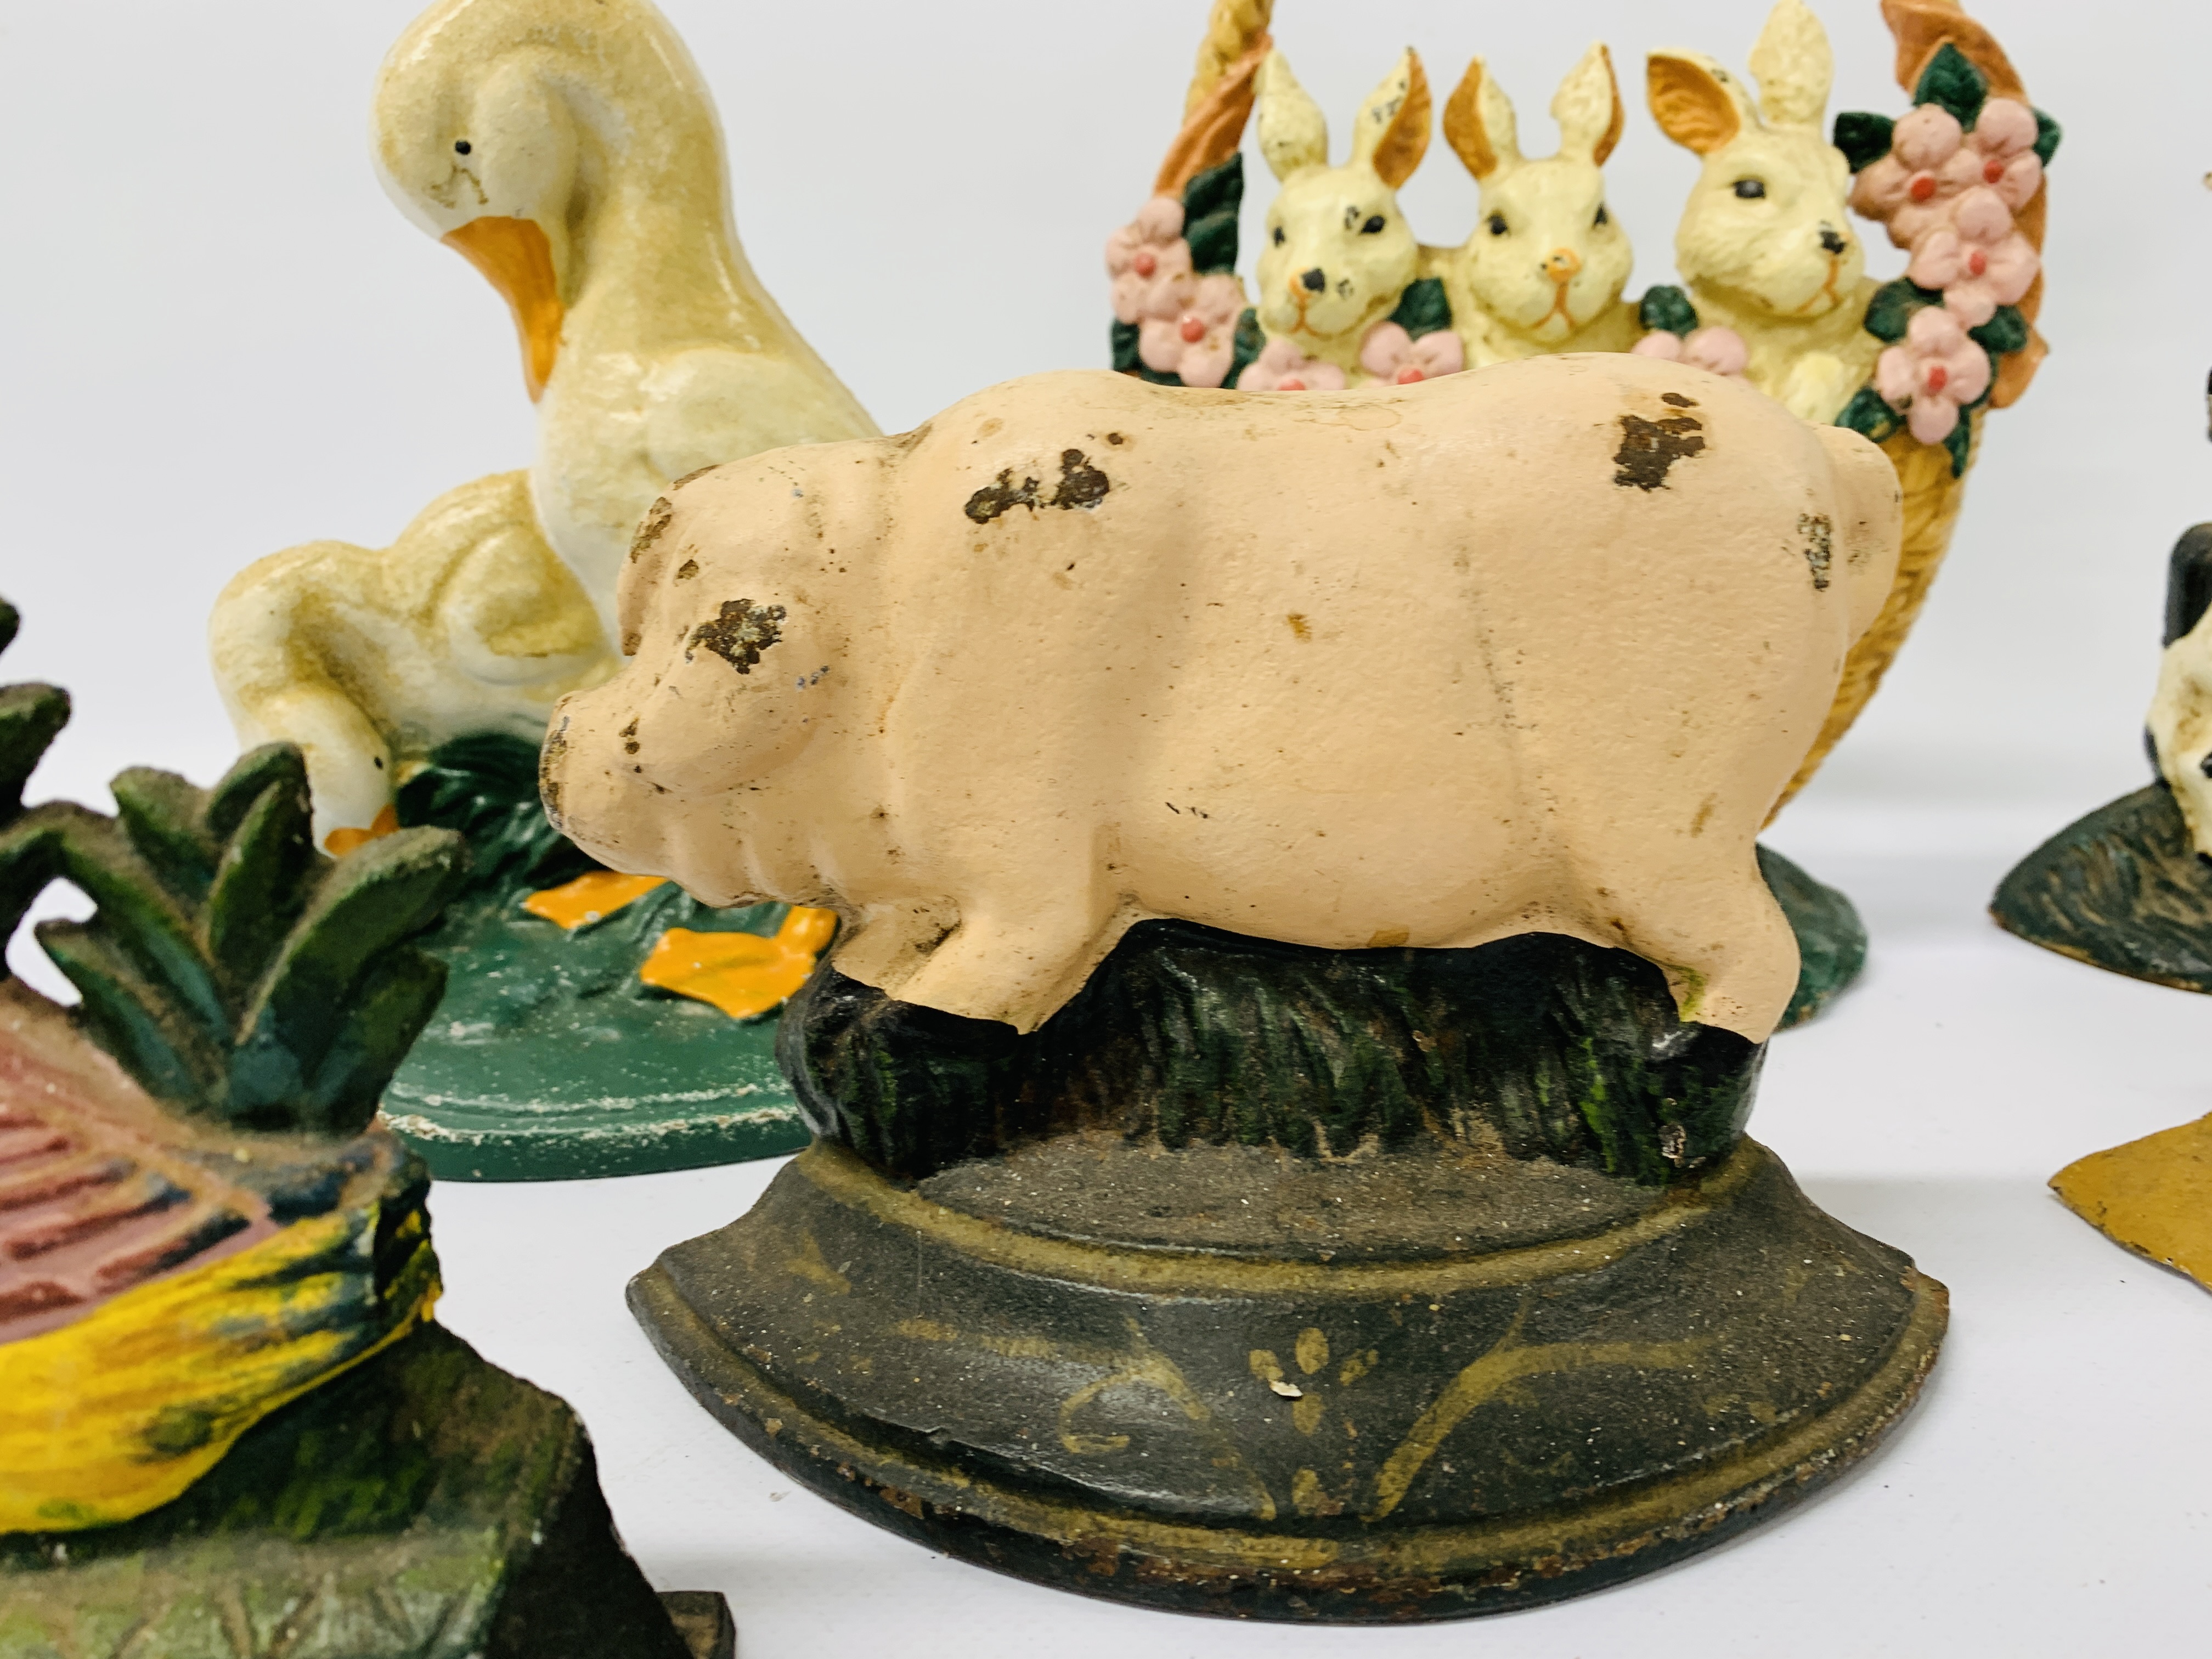 COLLECTION OF CAST REPRODUCTION DOORSTOPS TO INCLUDE EASTER BUNNIES, DUCKS, PIGS, ETC. - Image 5 of 8